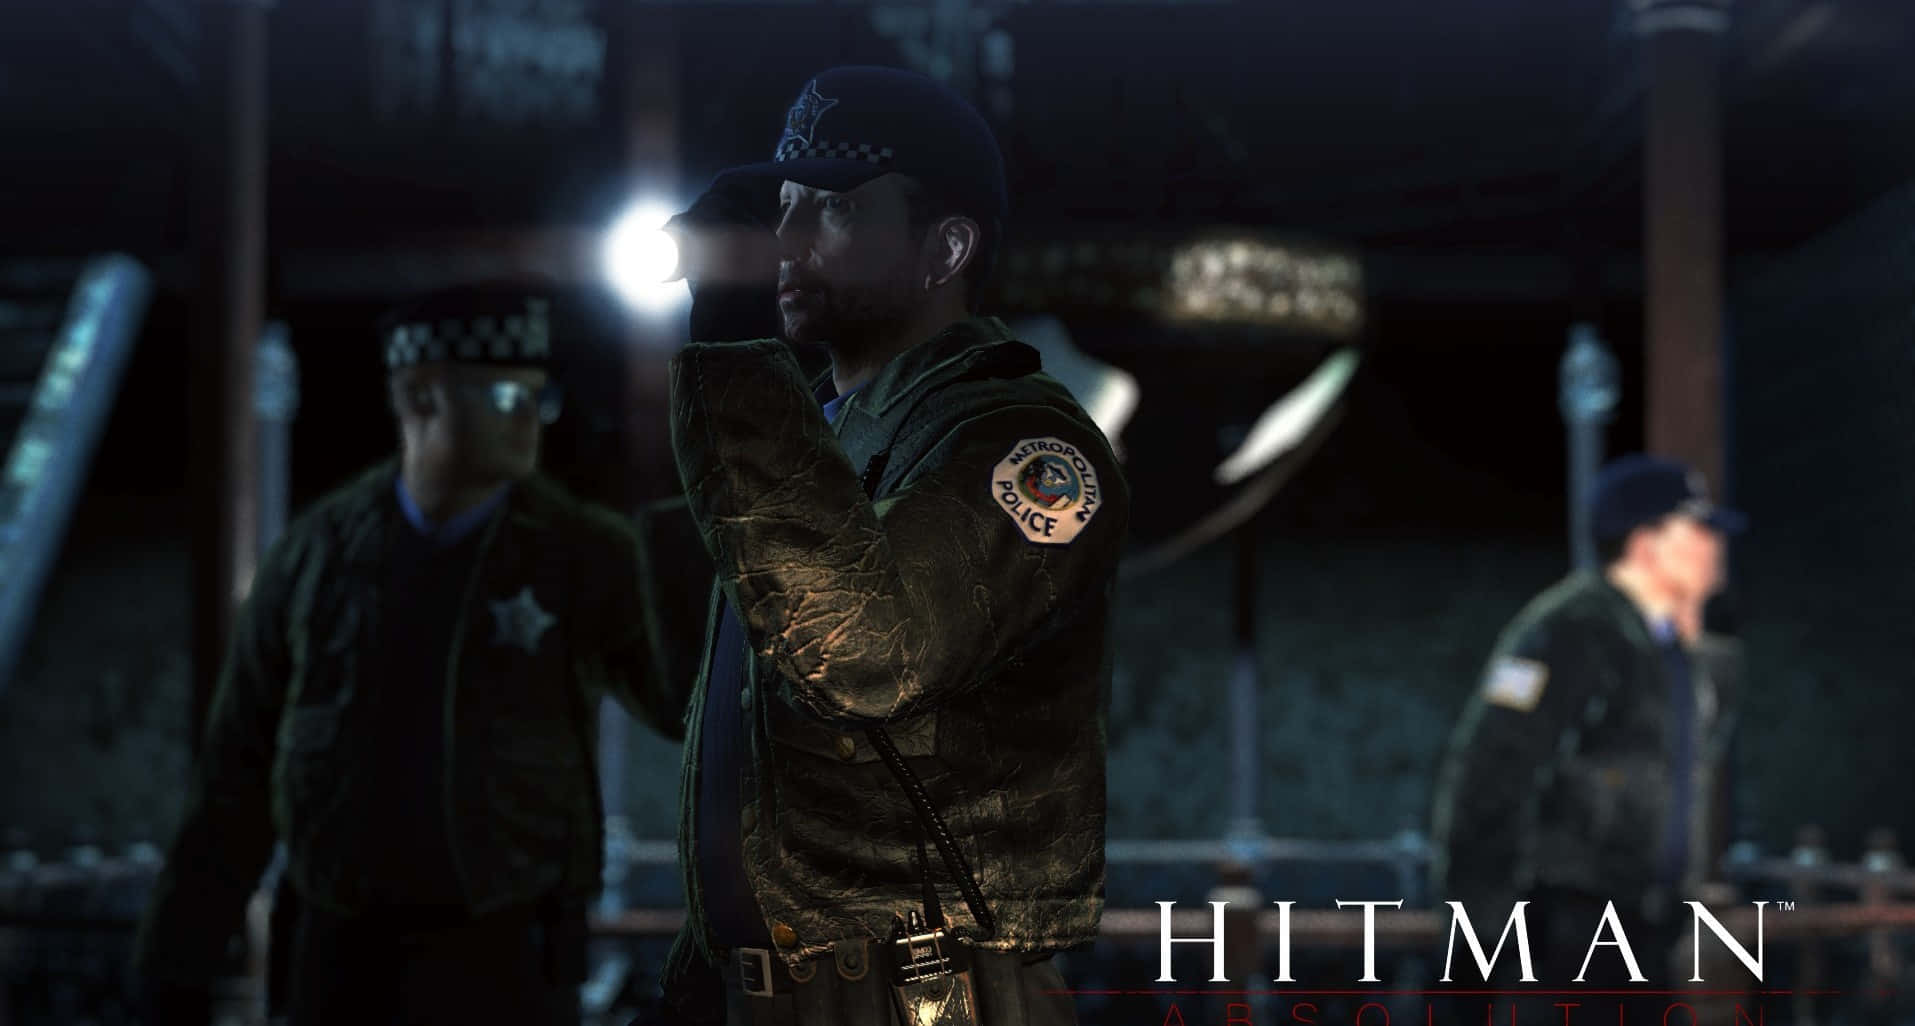 Step into a world of assassins with ‘Hitman Absolution’